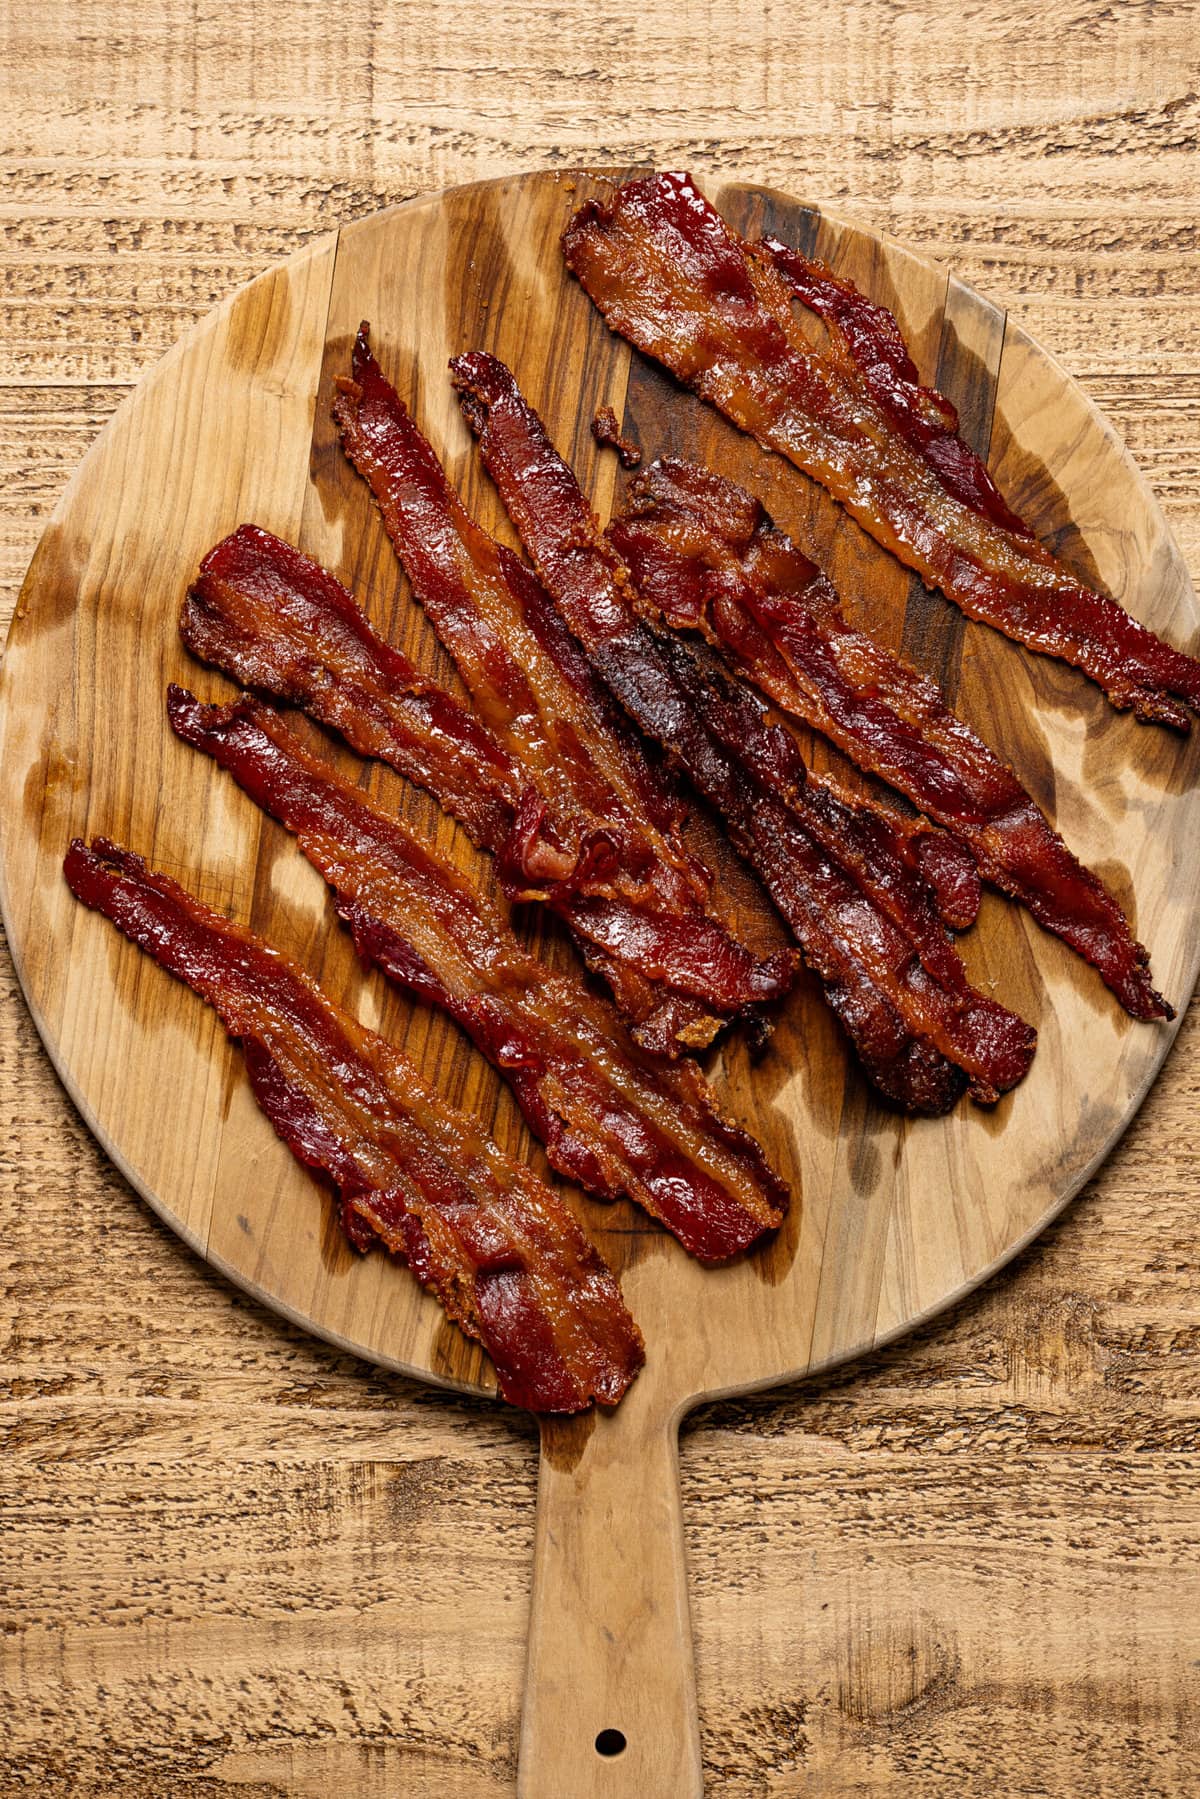 Candied bacon on a wooden cutting board.